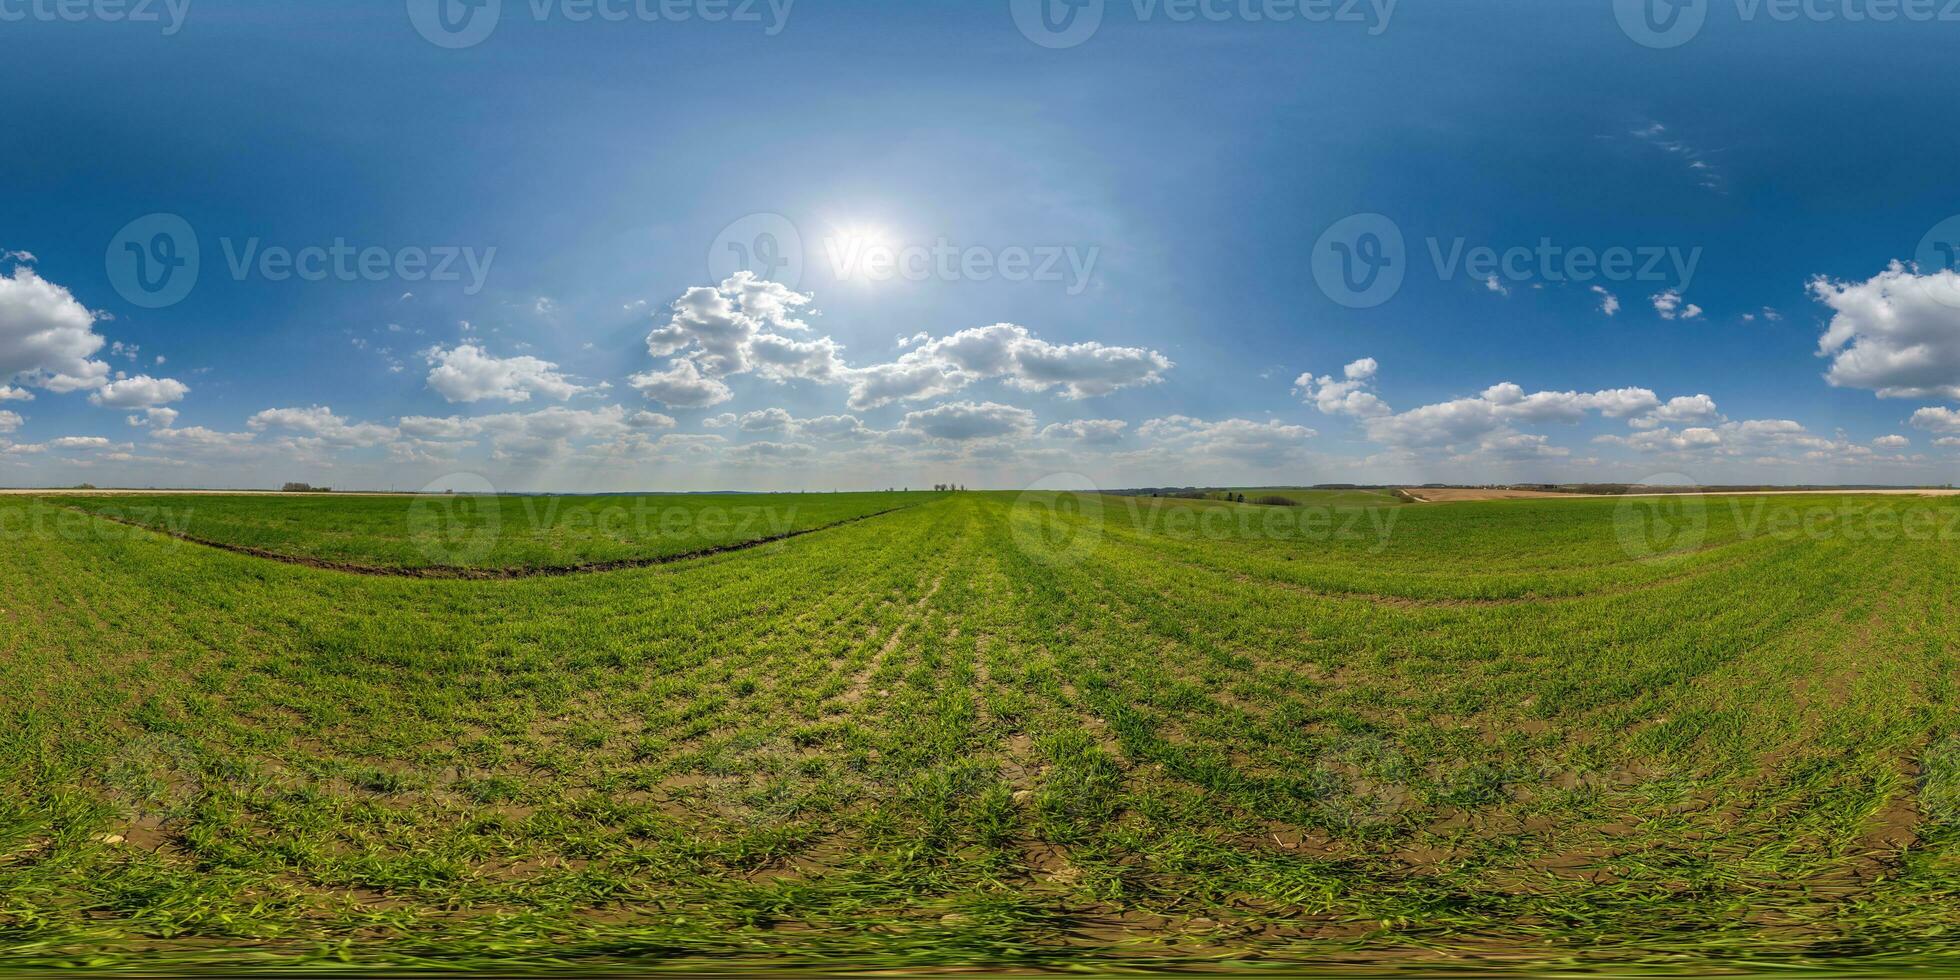 spherical 360 hdri panorama among green grass farming field with clouds on blue sky with sun in equirectangular seamless projection, use as sky replacement, game development as skybox or VR content photo